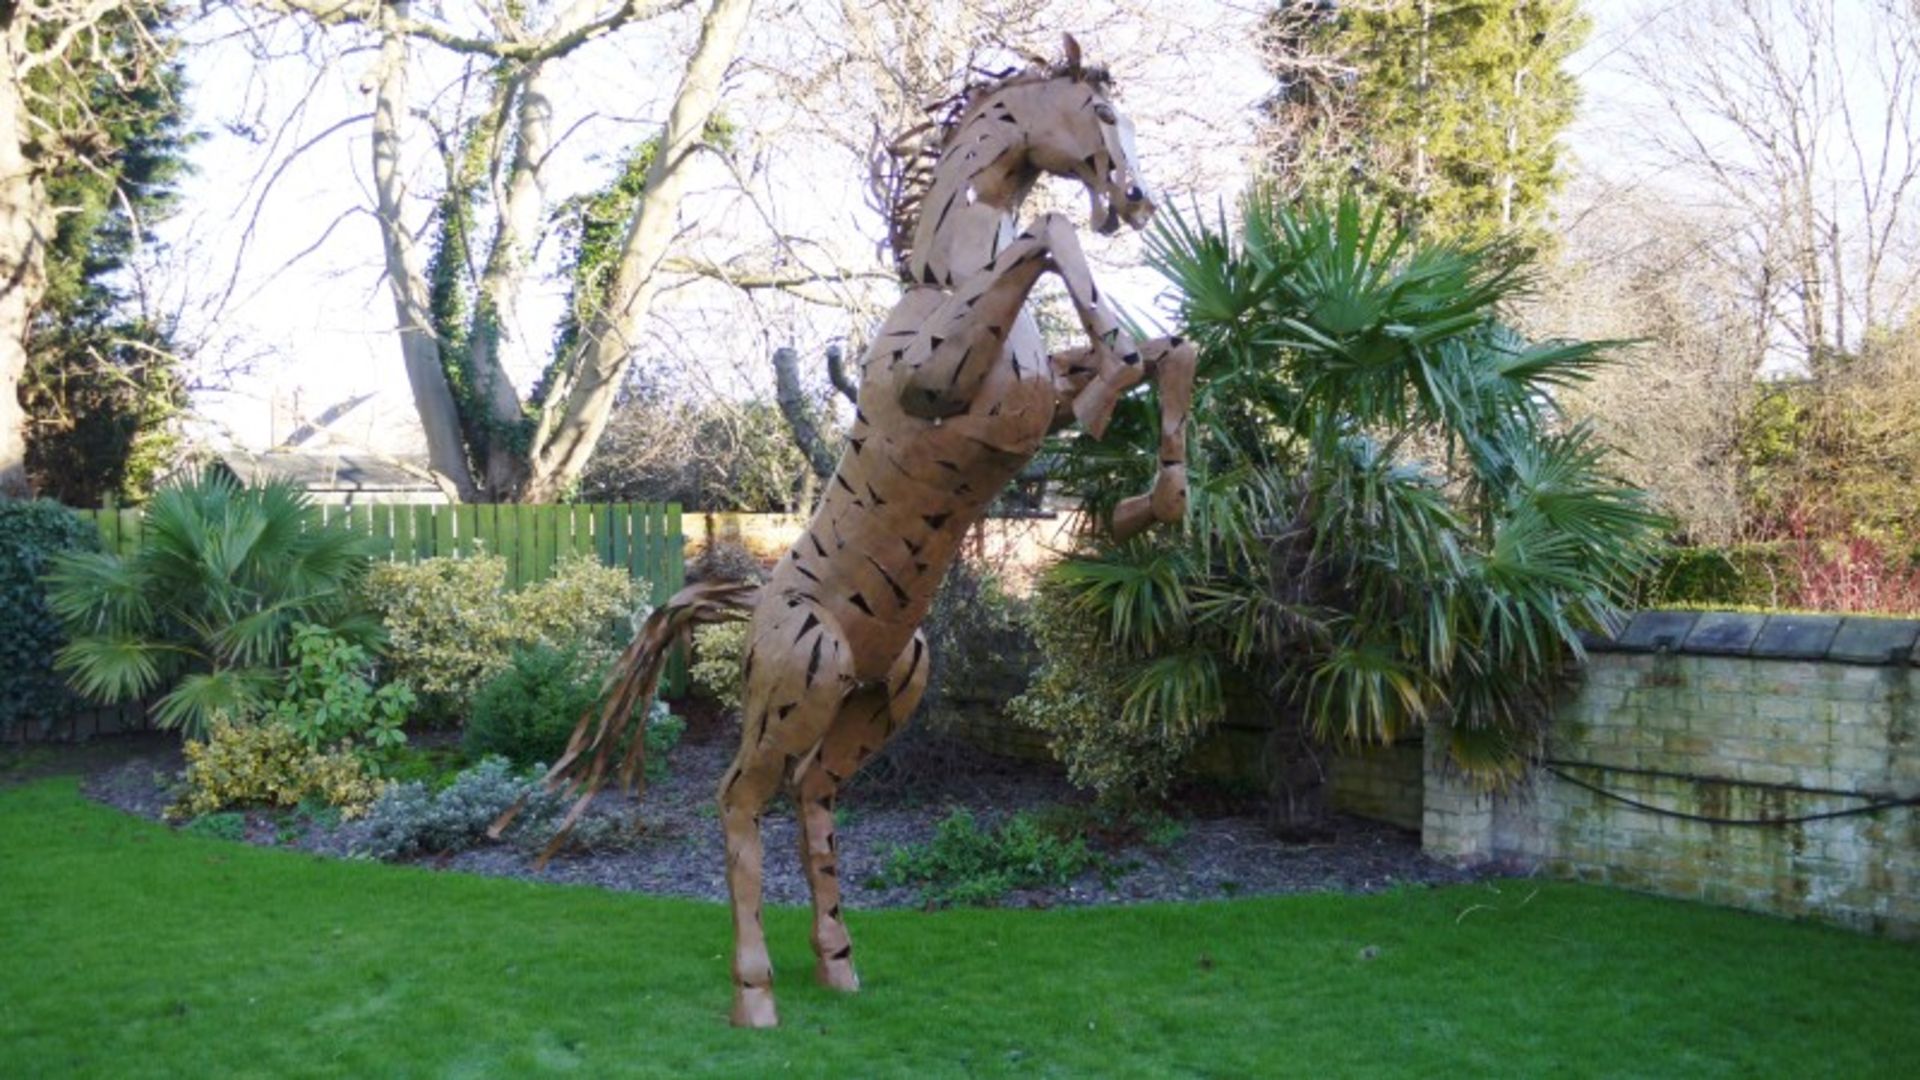 AMAZING HORSE STATUE 11FT HIGH - larger than real life!